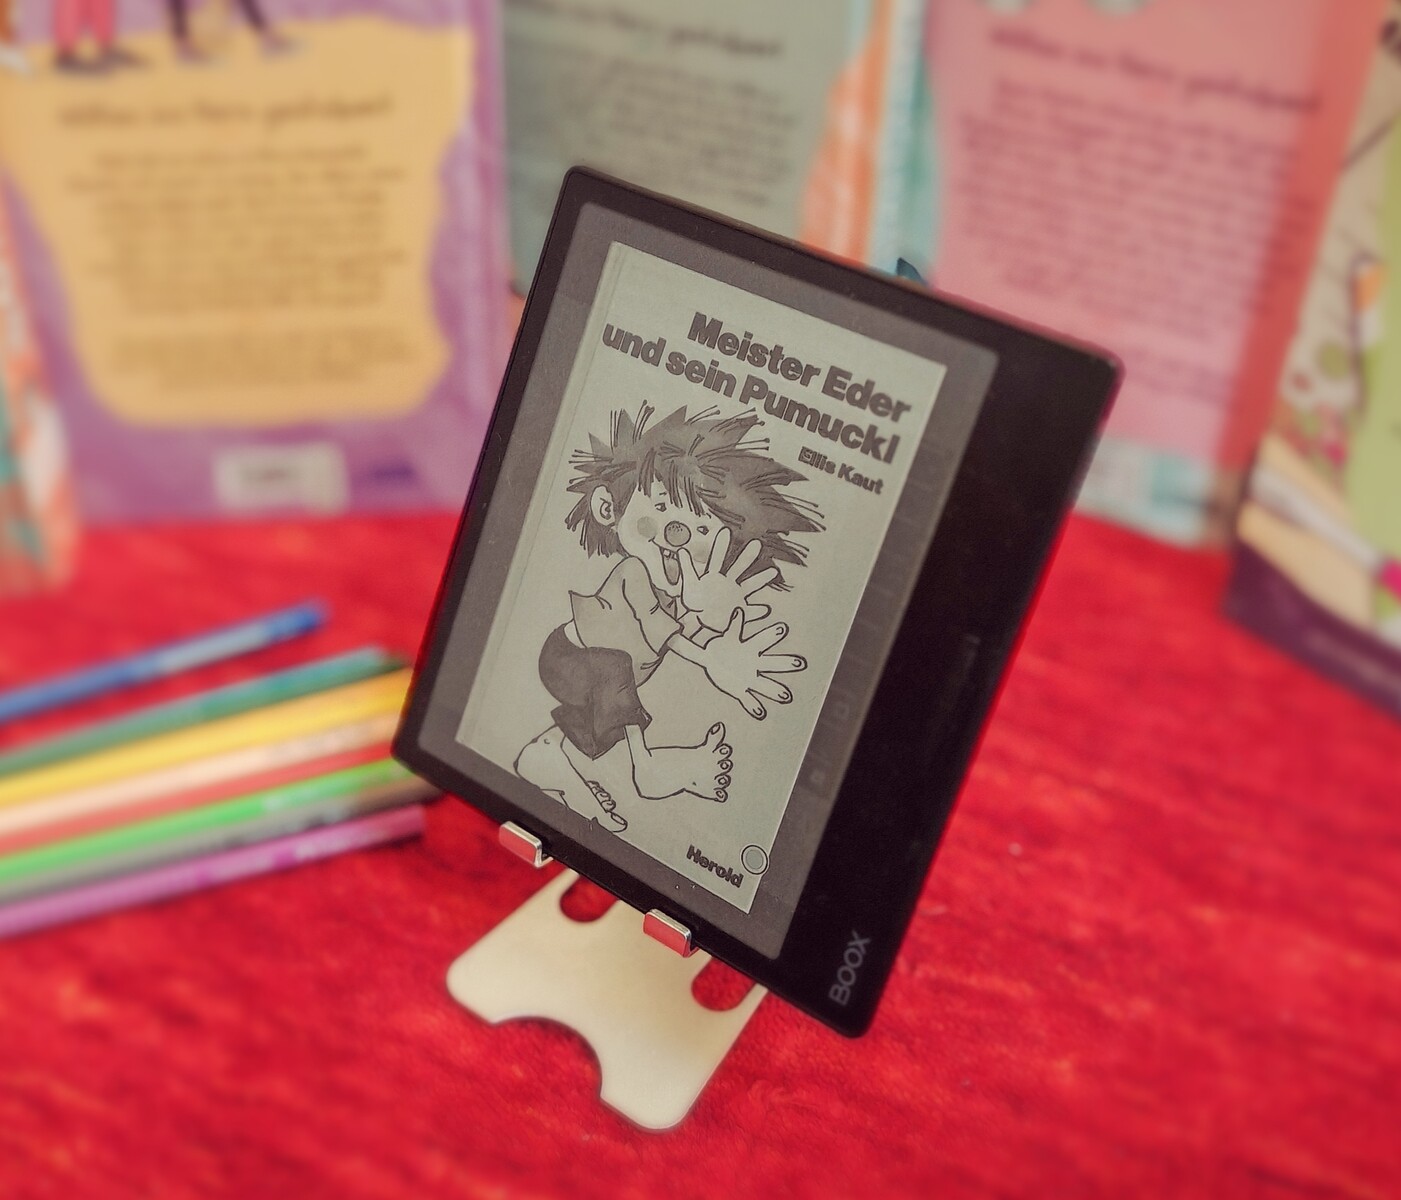 Onyx Boox Tab X review: e-ink tablet goes big on specs and price